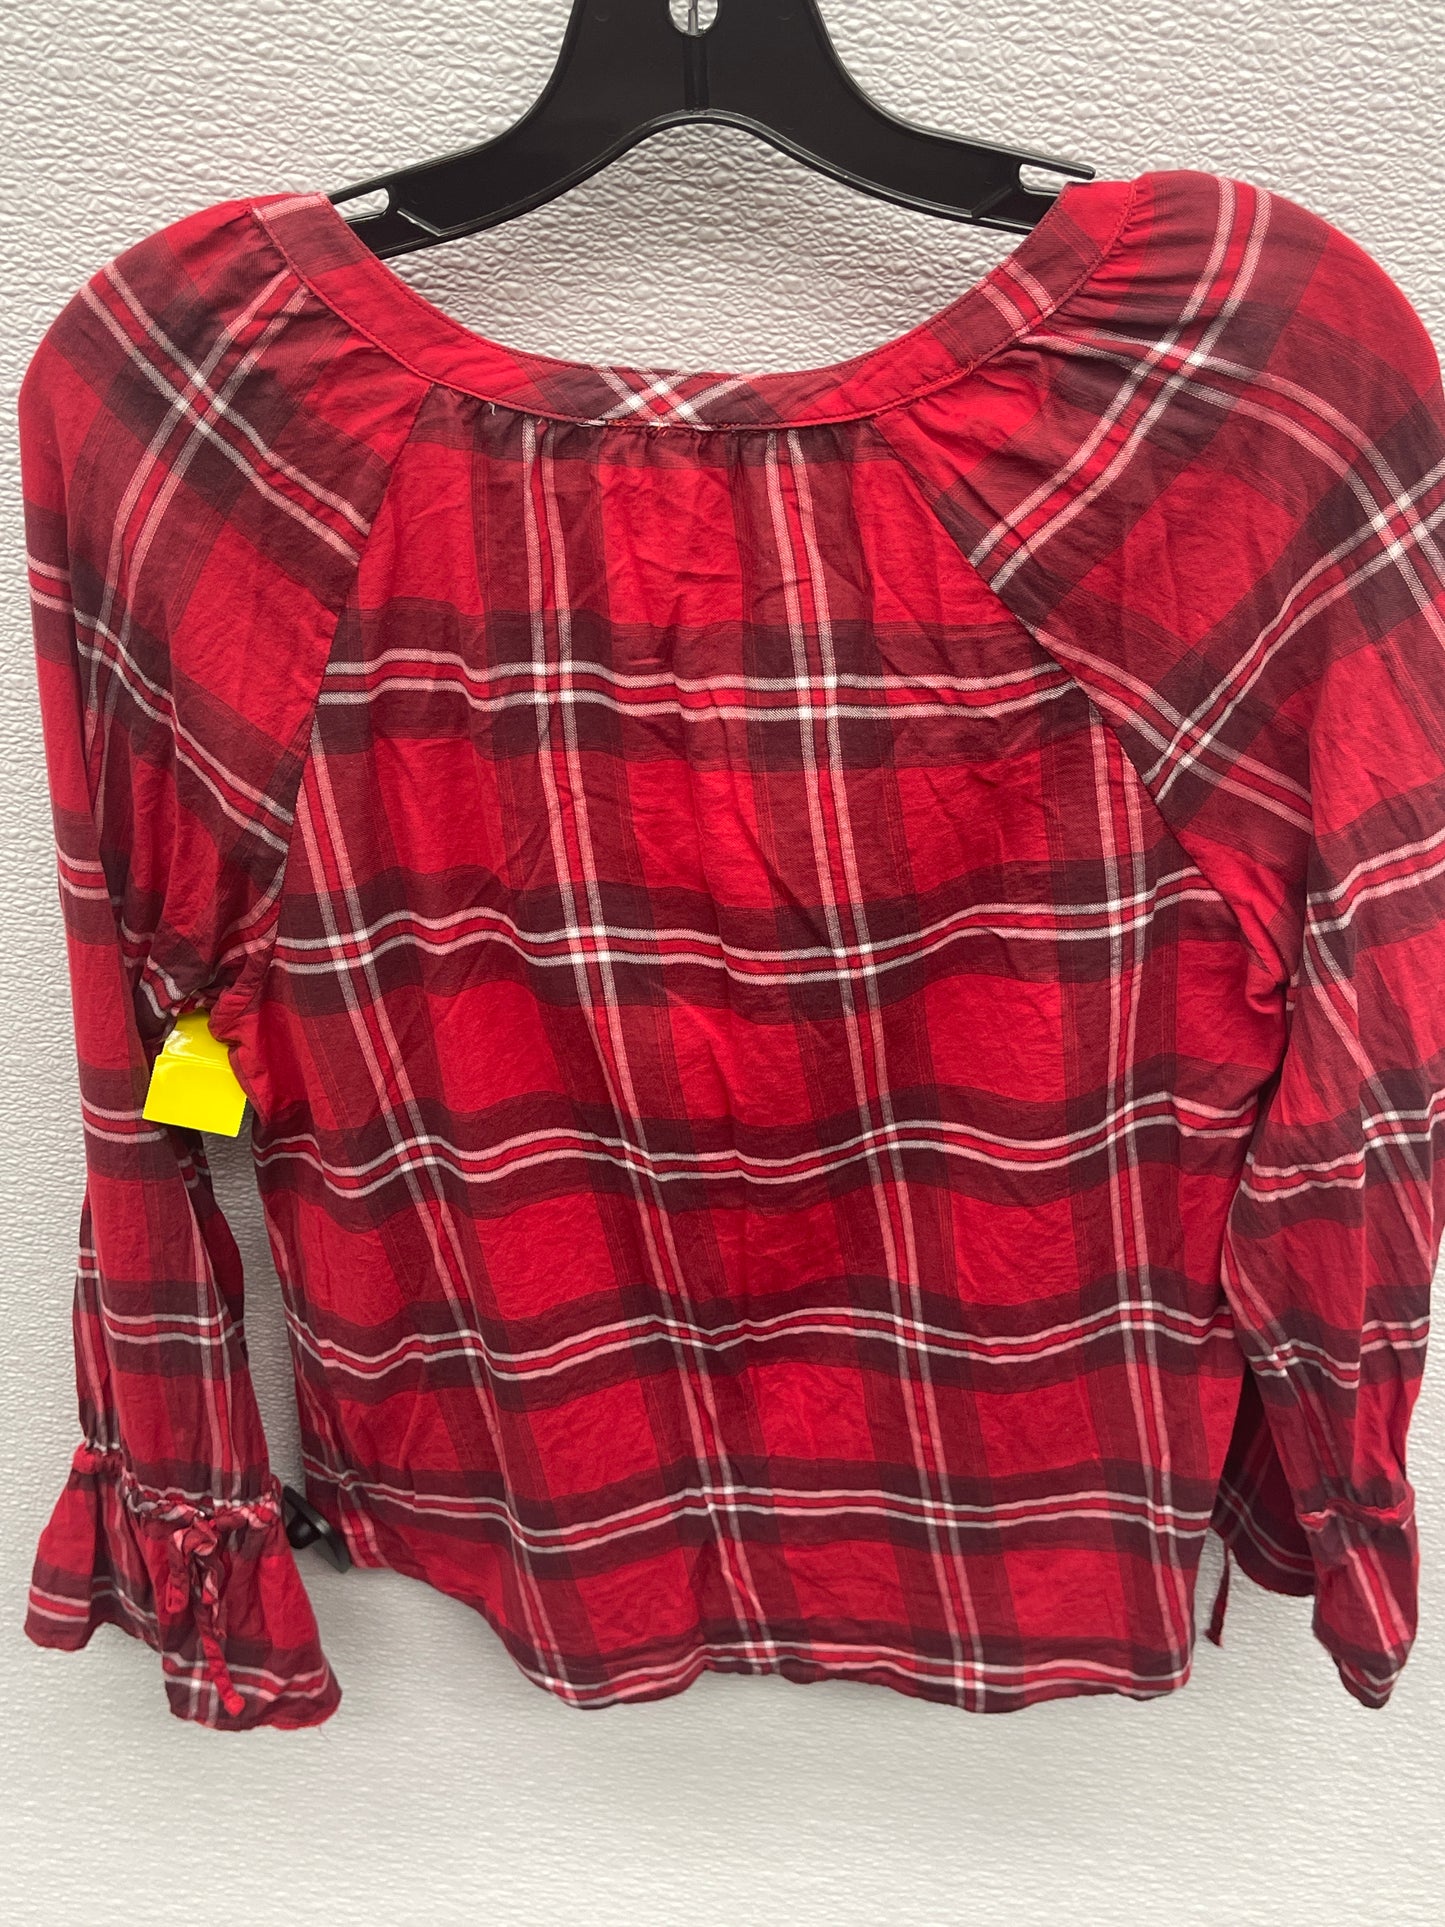 Top Long Sleeve By Talbots  Size: S